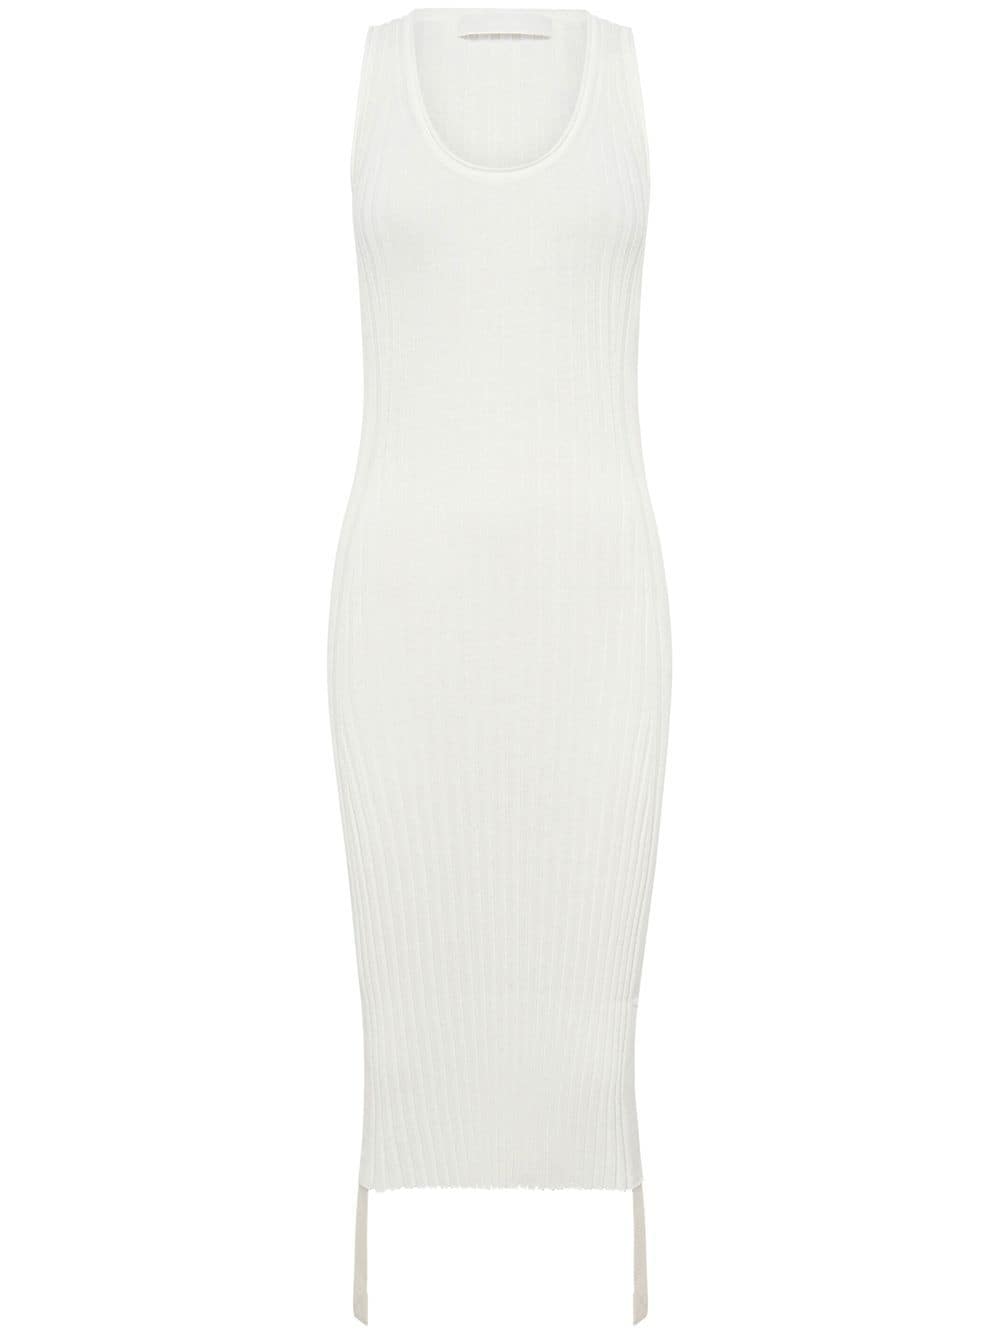 Dion Lee gathered utility dress - White